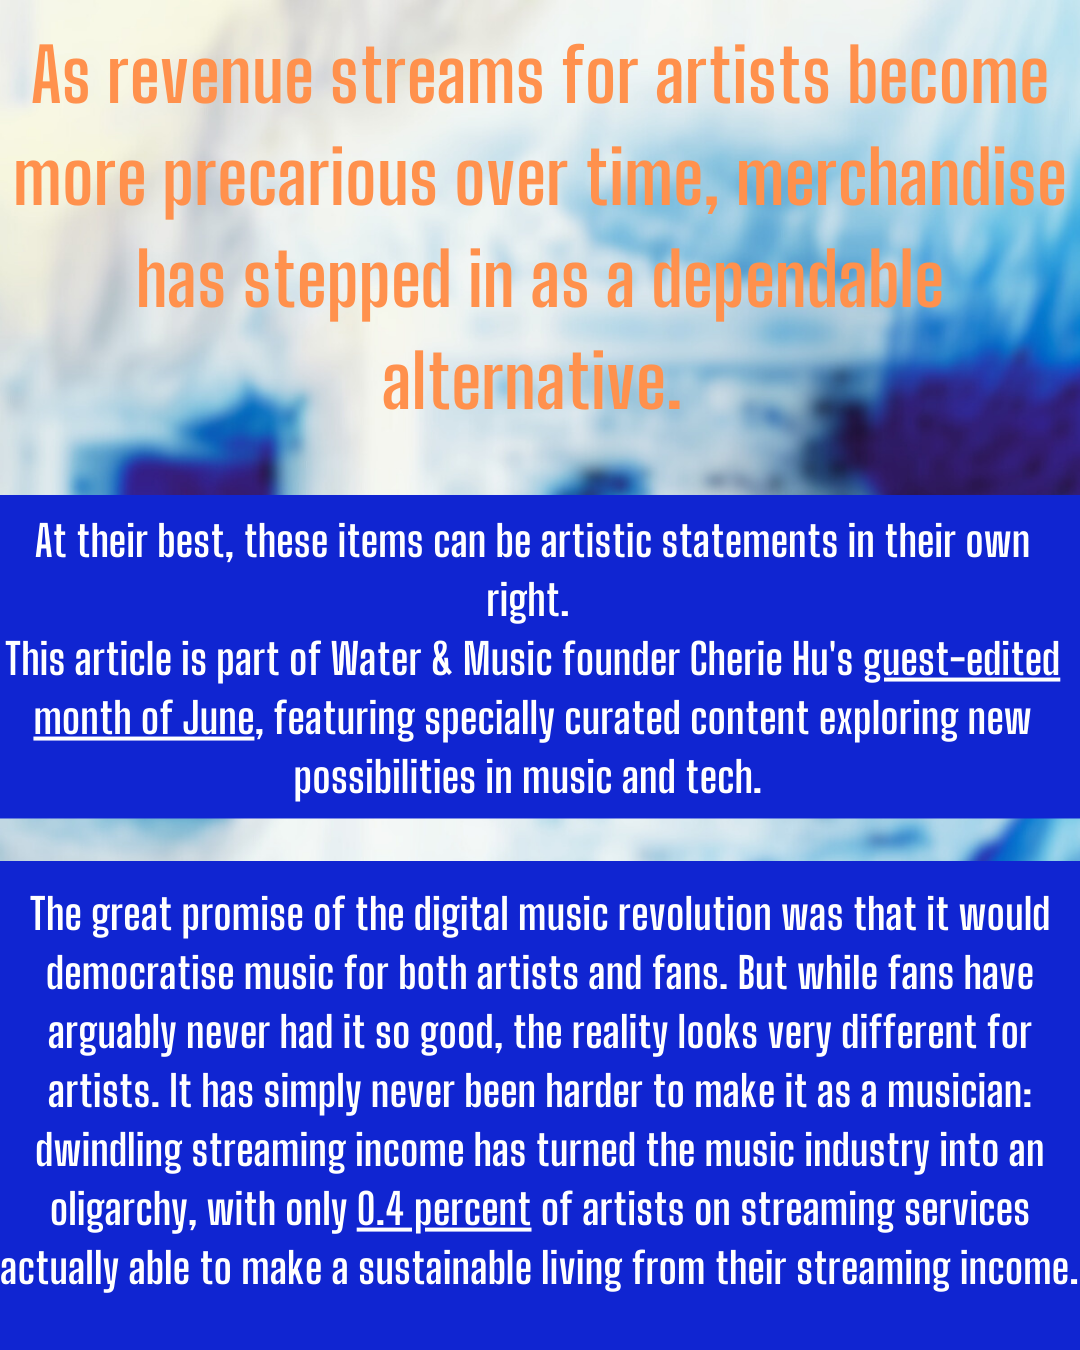 At their best, these items can be artistic statements in their own
(1&8
This article is part of Water & Music founder Cherie Hu's guest-edited
month of June, featuring specially curated content exploring new
possibilities in music and tech.

The great promise of the digital music revolution was that it would
democratise music for both artists and fans. But while fans have
ELE CIEE EEO ROCCE ORO TE CE Ce 1]
artists. It has simply never been harder to make it as a musician:

dwindling streaming income has turned the music industry into an
oligarchy, with only 0.4 percent of artists on streaming services

actually able to make a sustainable living from their streaming income.